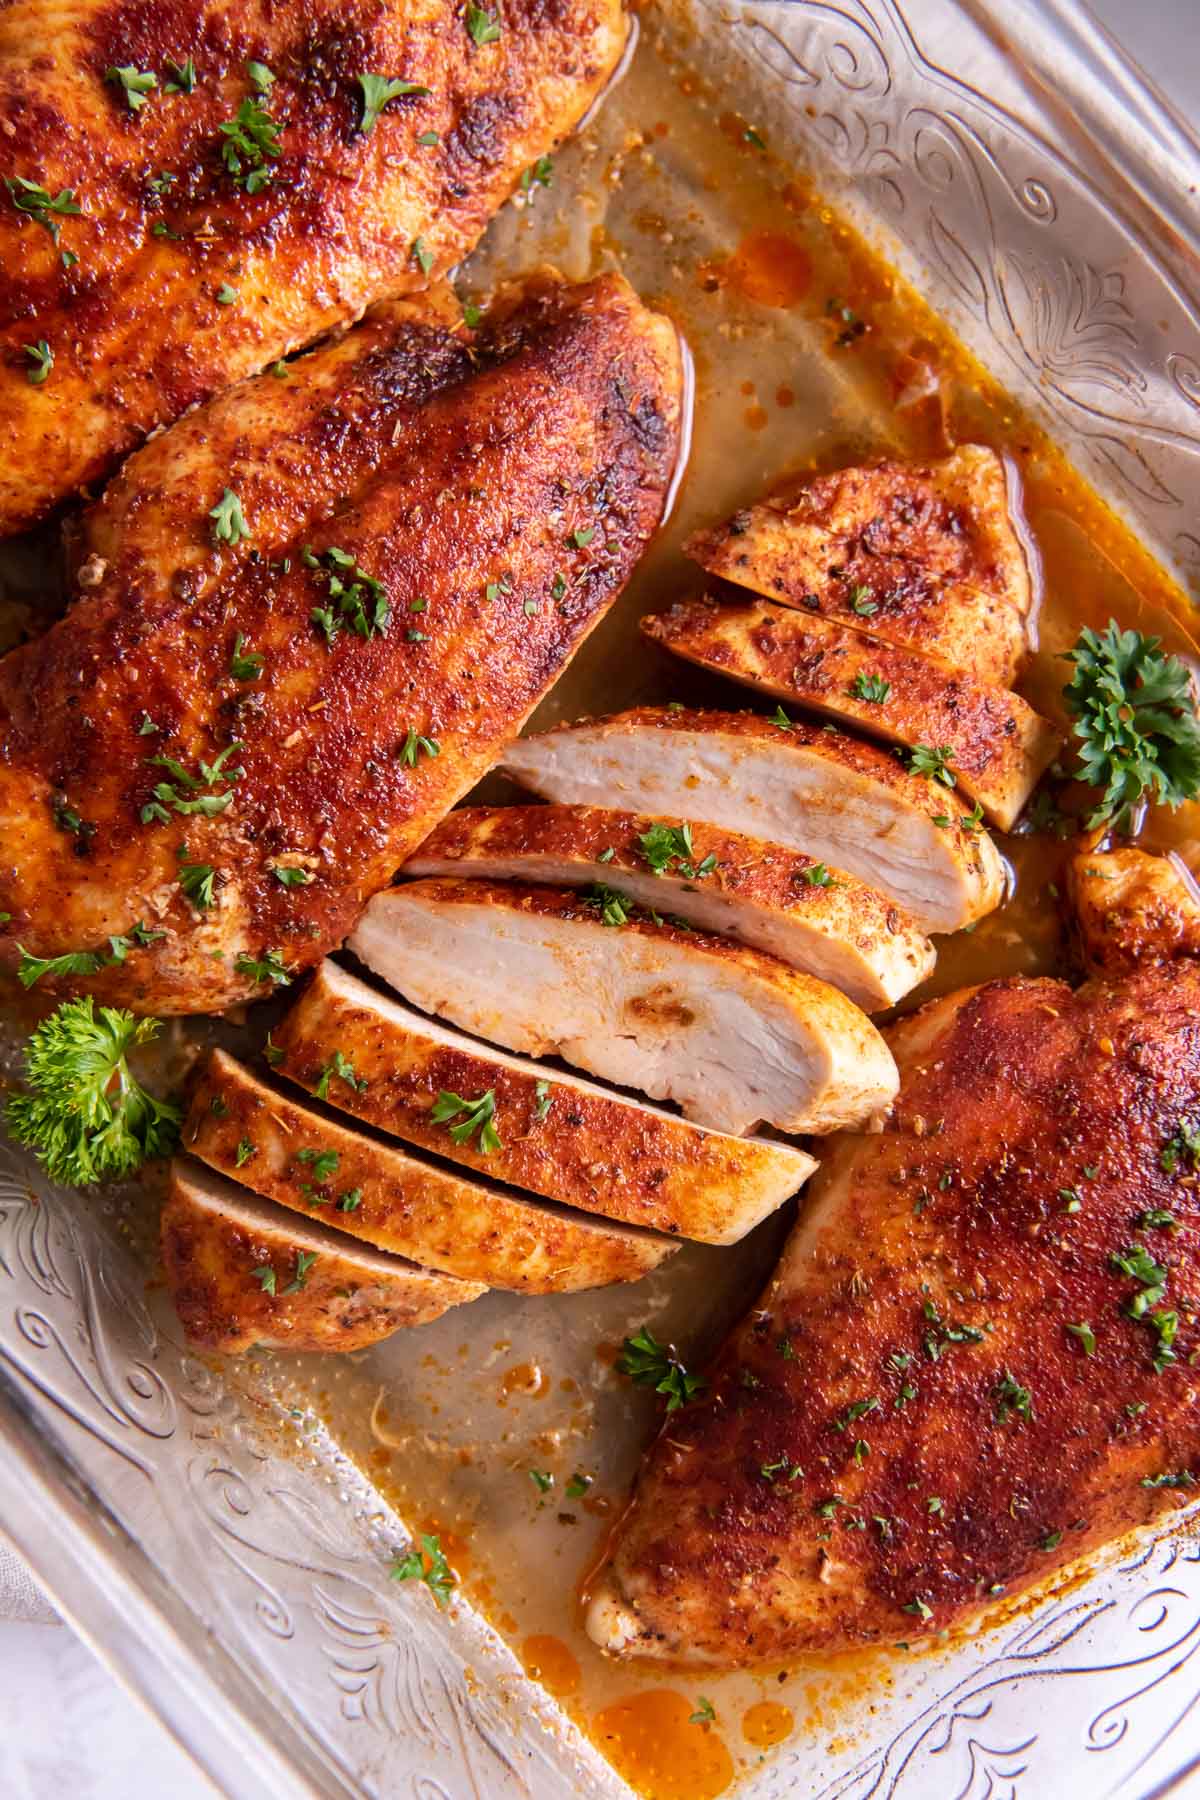 Sliced and whole baked chicken breasts in baking dish.